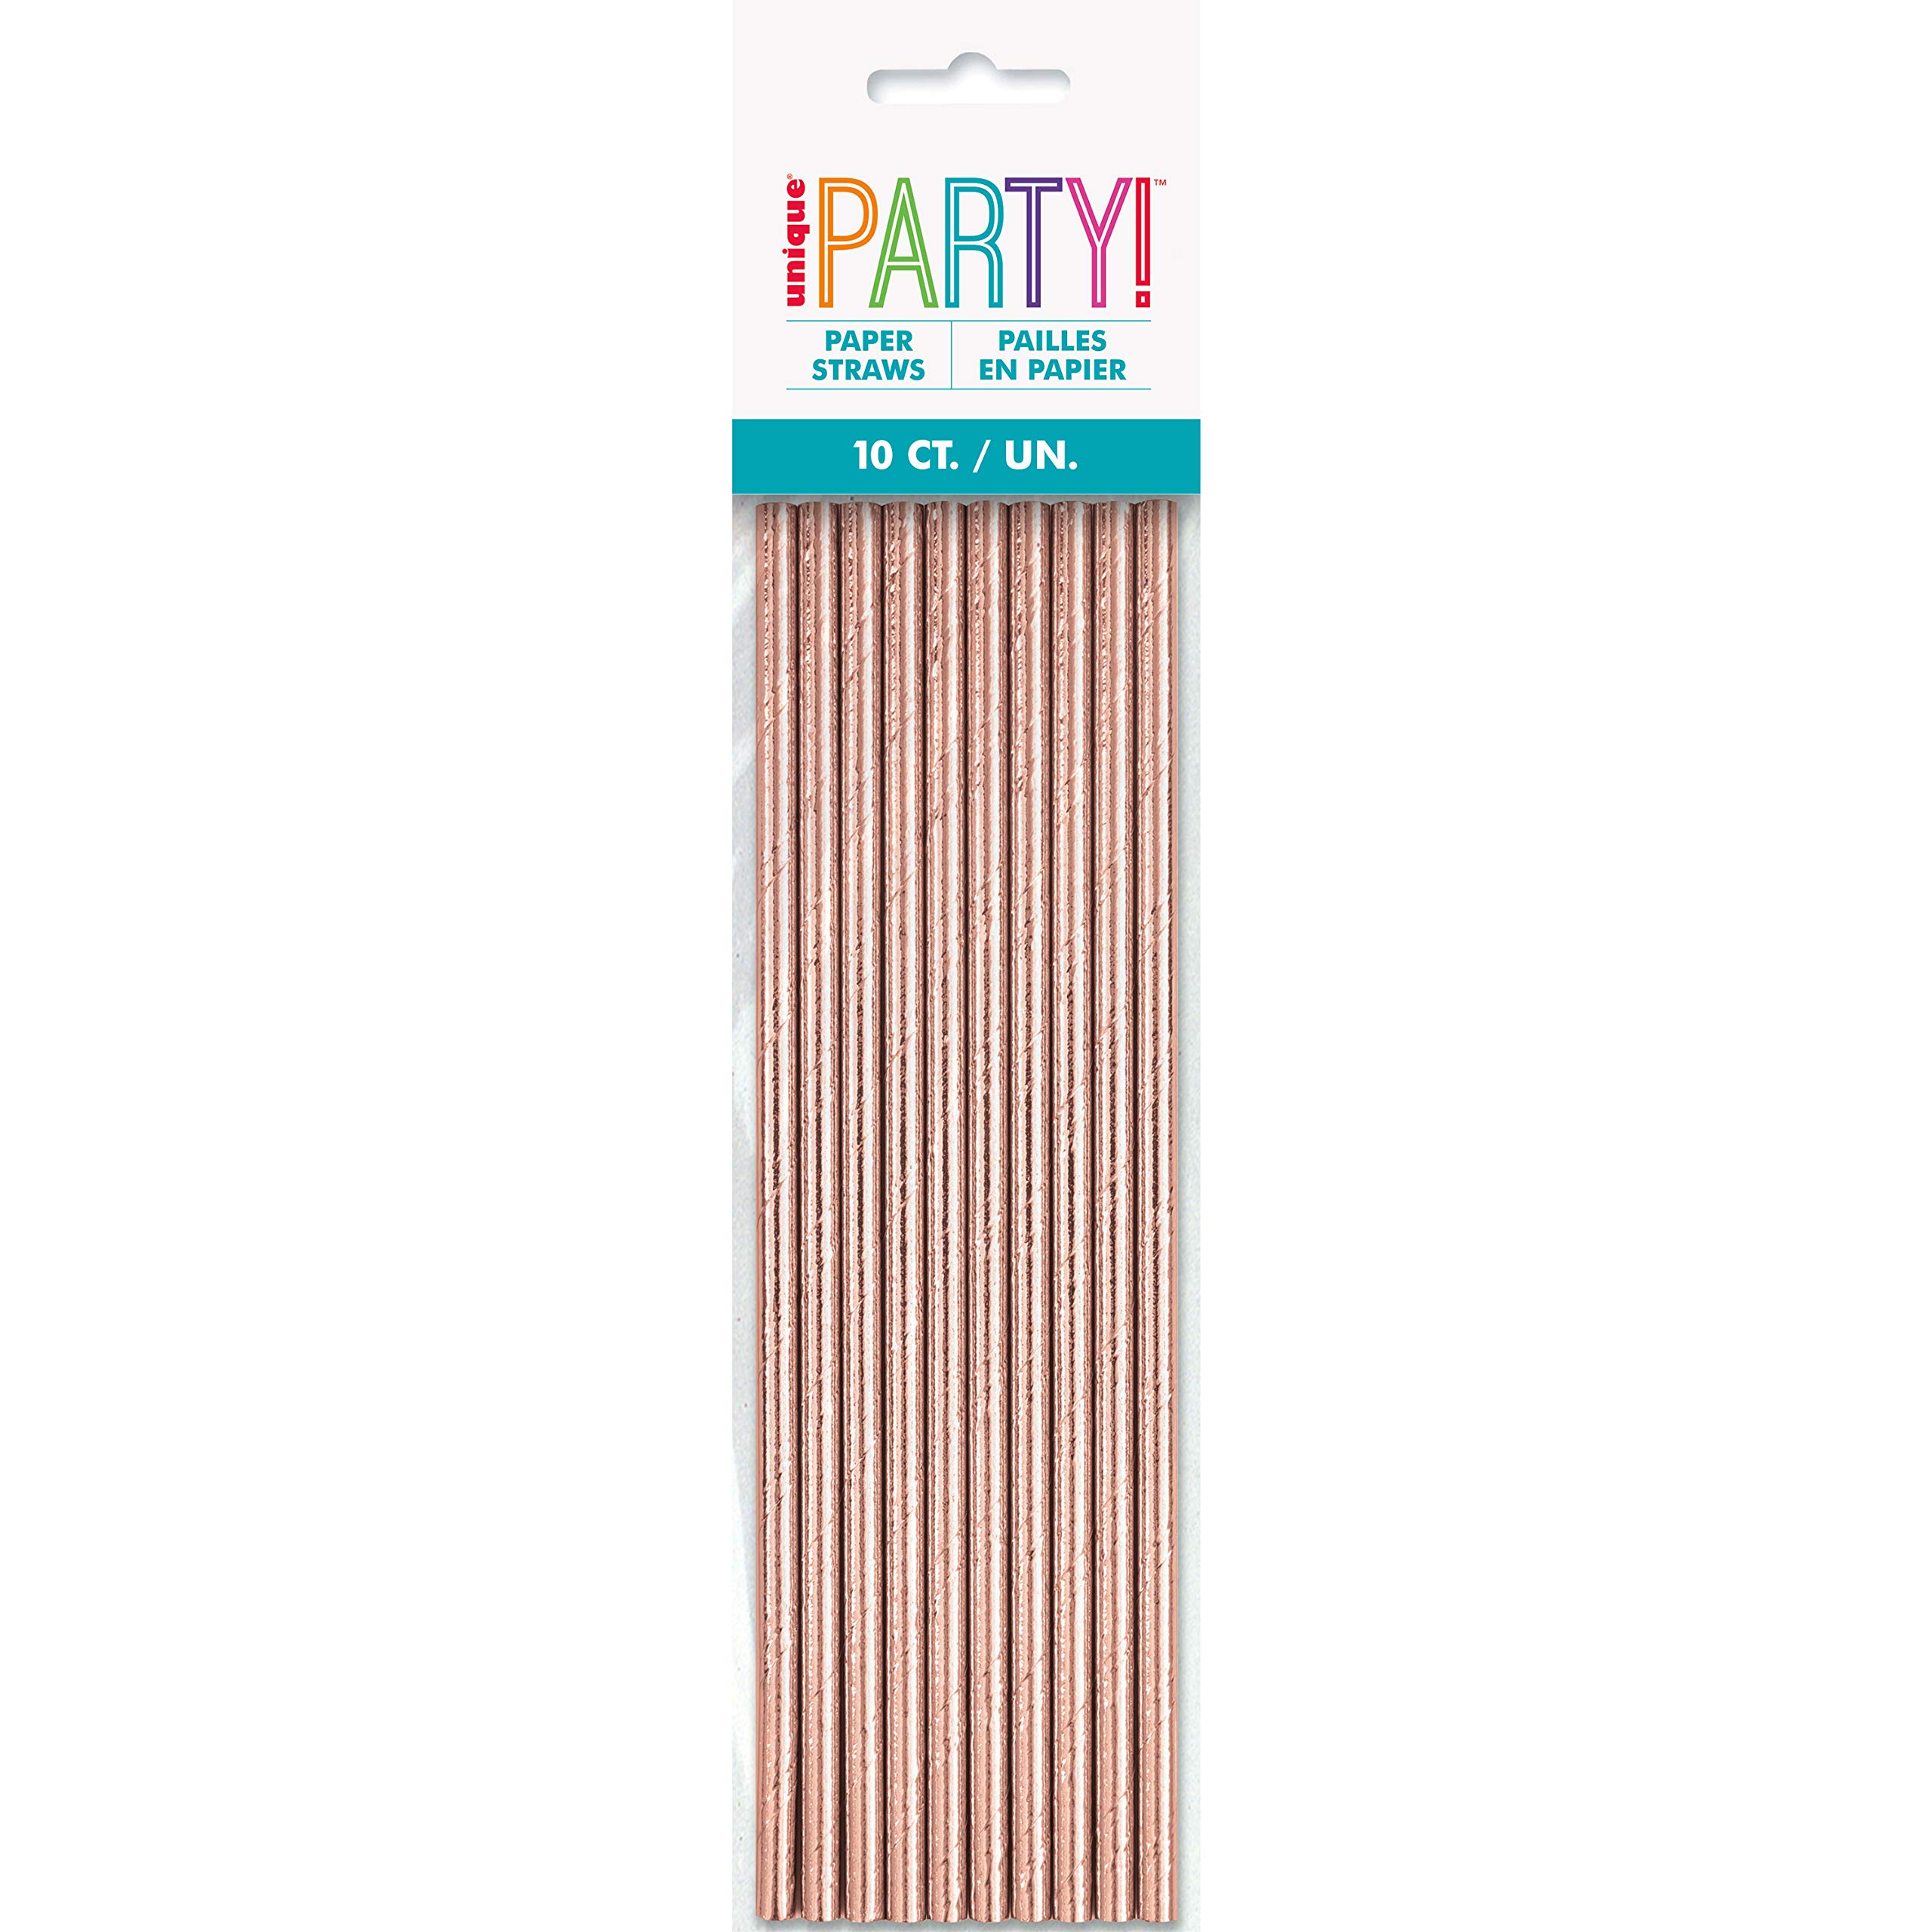 Shimmering Rose Gold Foil Paper Straws - 8.25" (Pack of 10) | Elegant Design & Biodegradable Materials | Perfect for Any Event